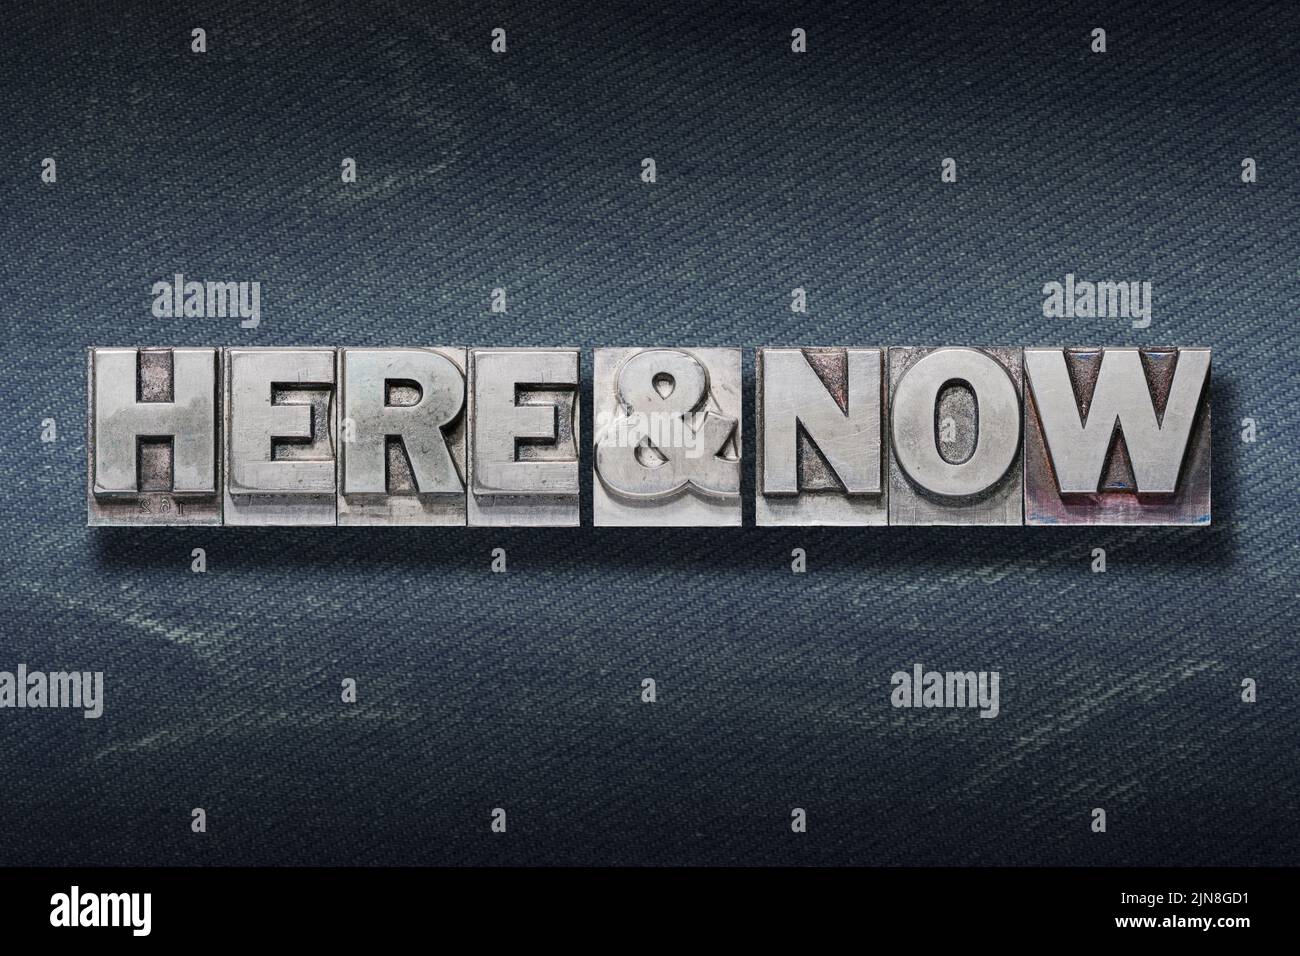 here and now phrase made from metallic letterpress on dark jeans background Stock Photo